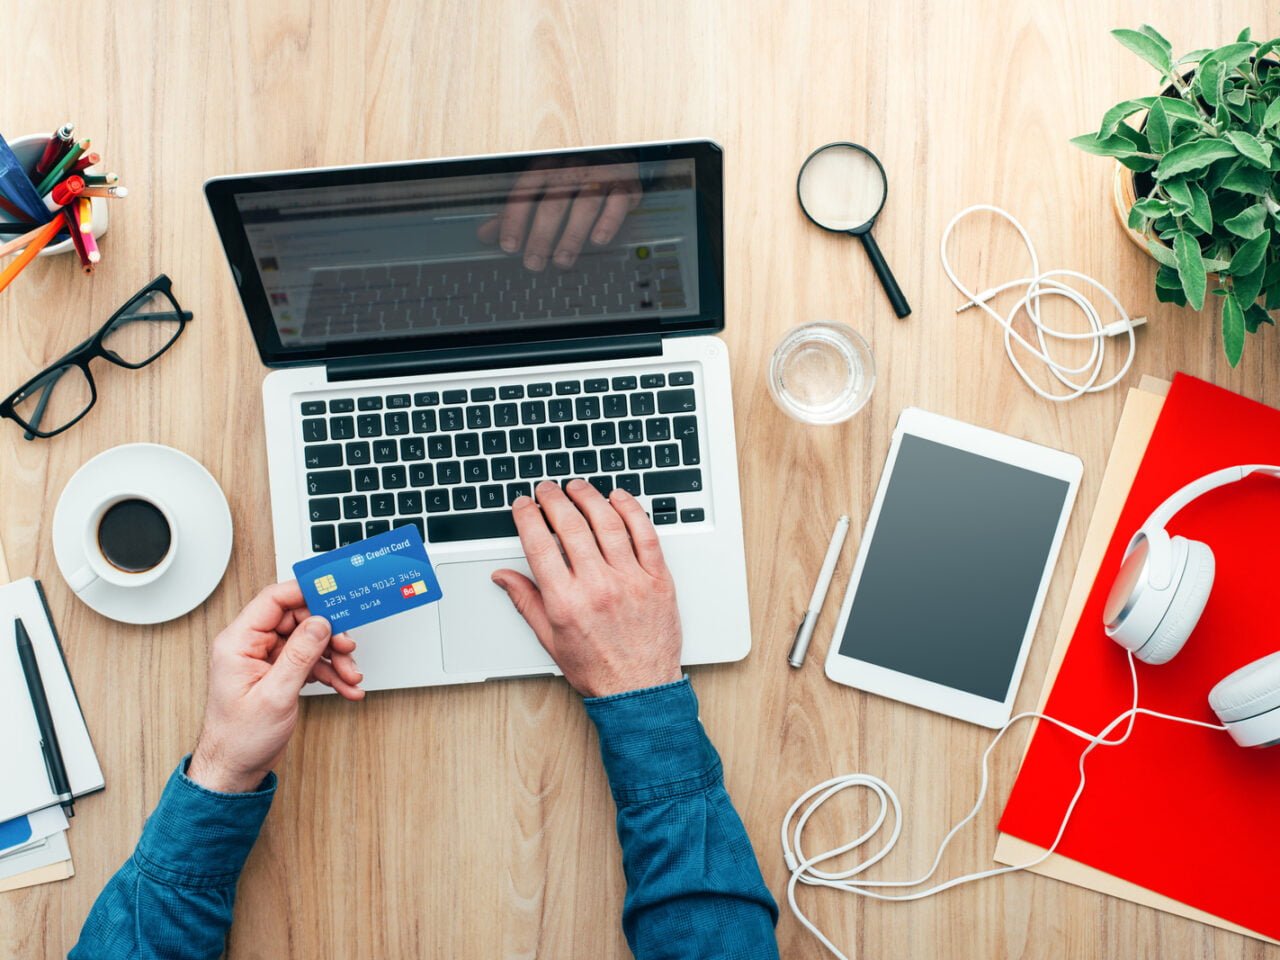 Man working at desk and purchasing products online, he is making a payment using a credit card, online shopping concept